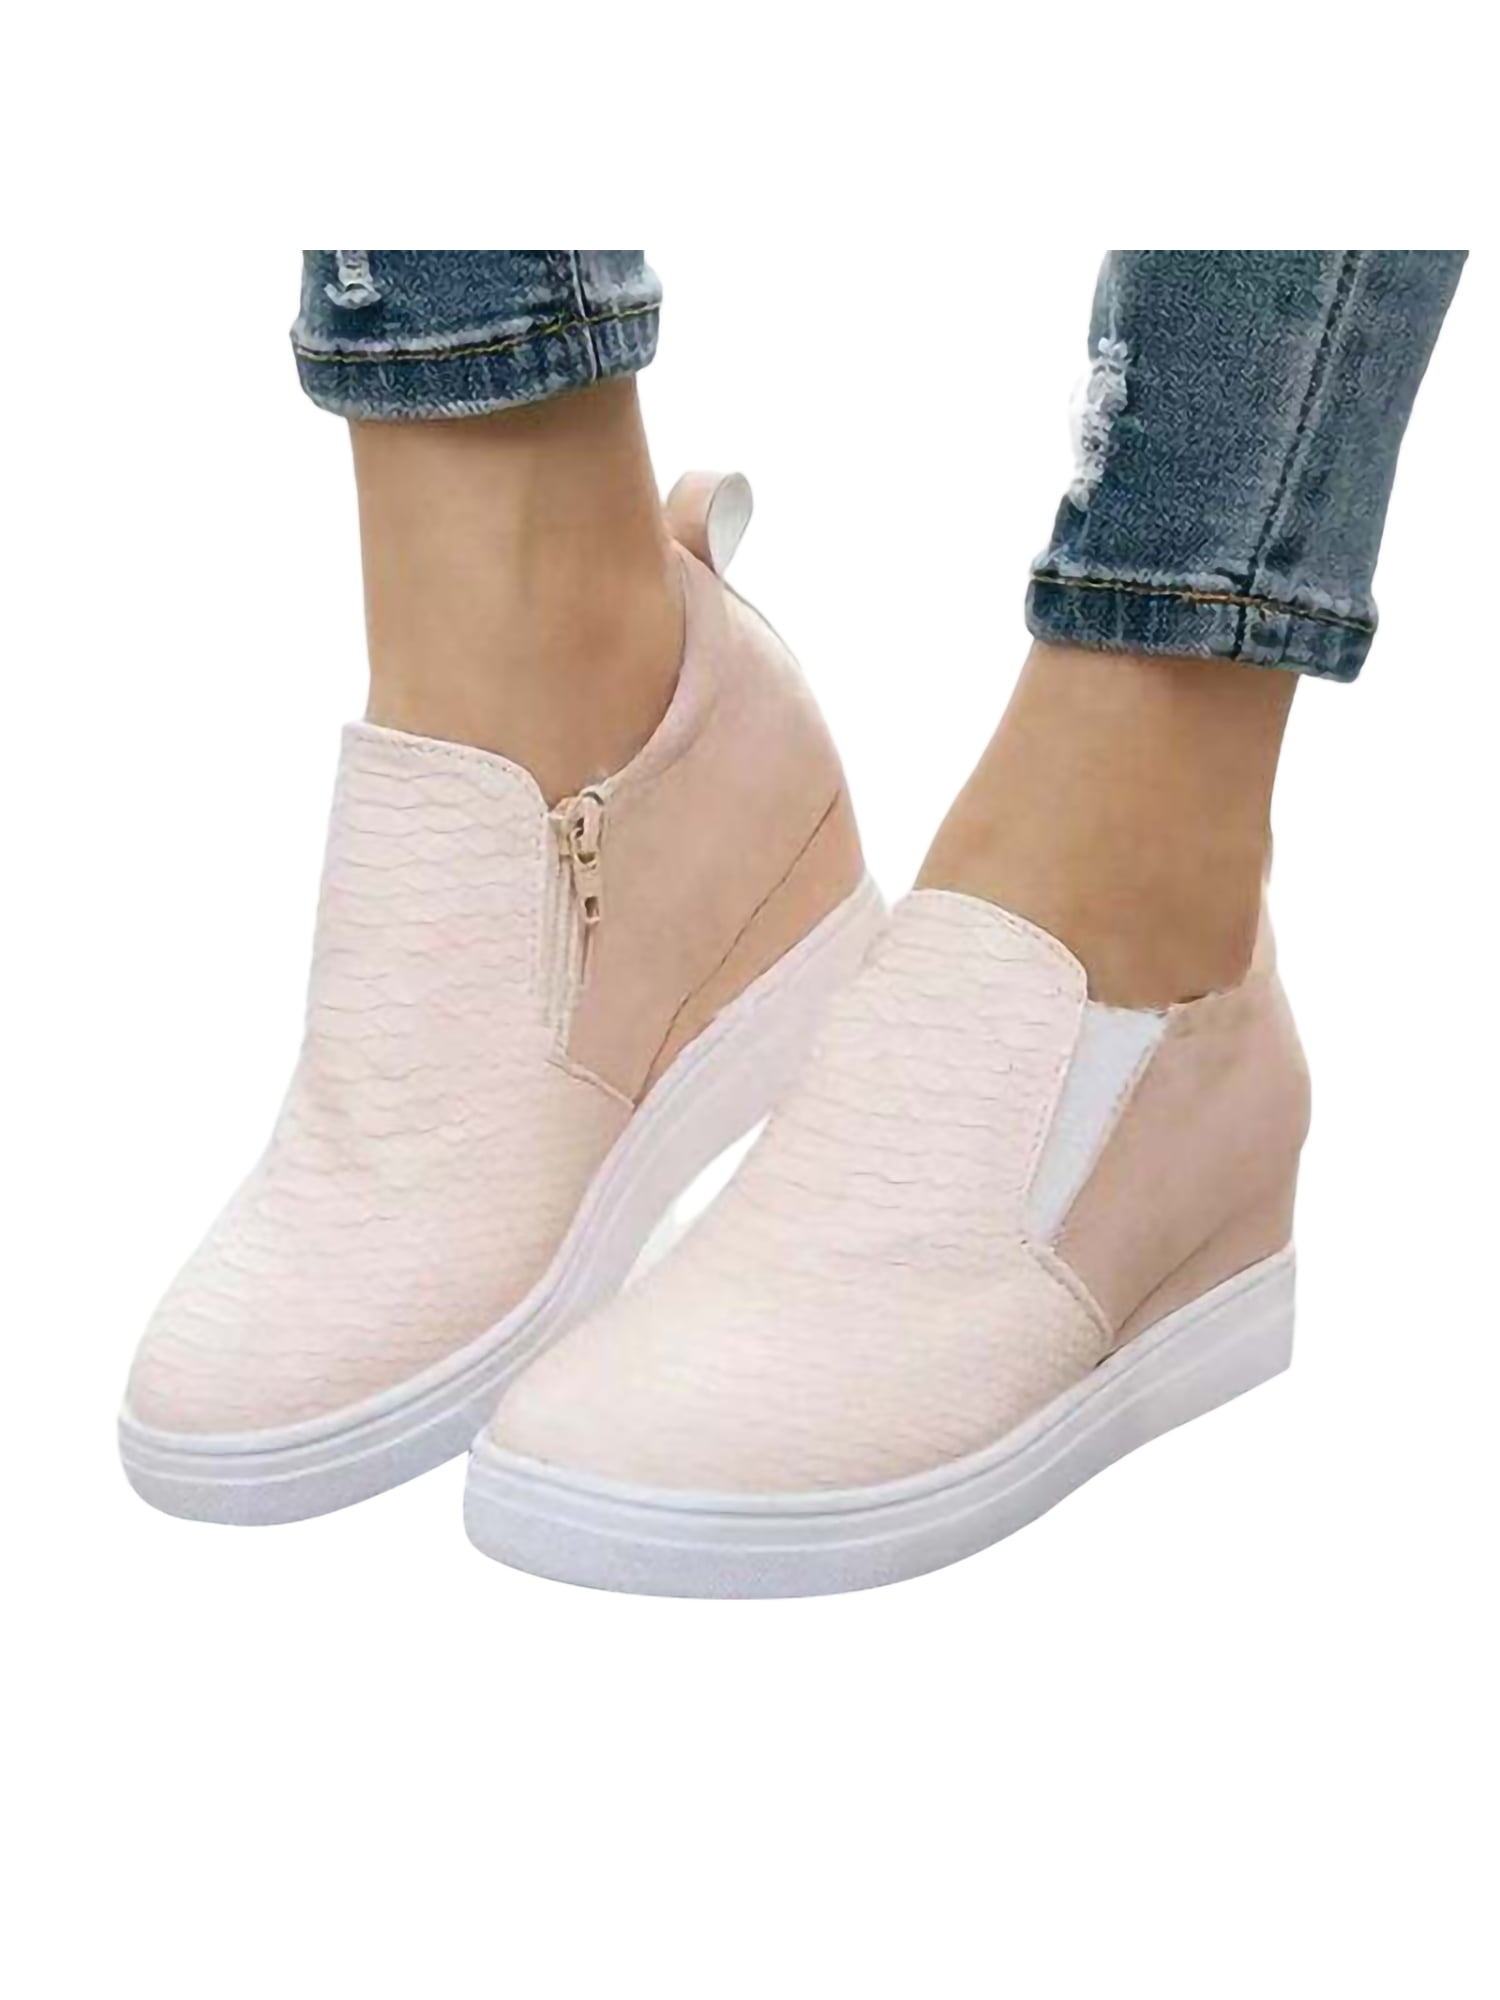 GODIWAN Women Sneakers High Top Hidden Wedges Casual Shoes Ladies Ankle Boots Shoes for Woman Hook & Loop Winter Warm Fur Shoes